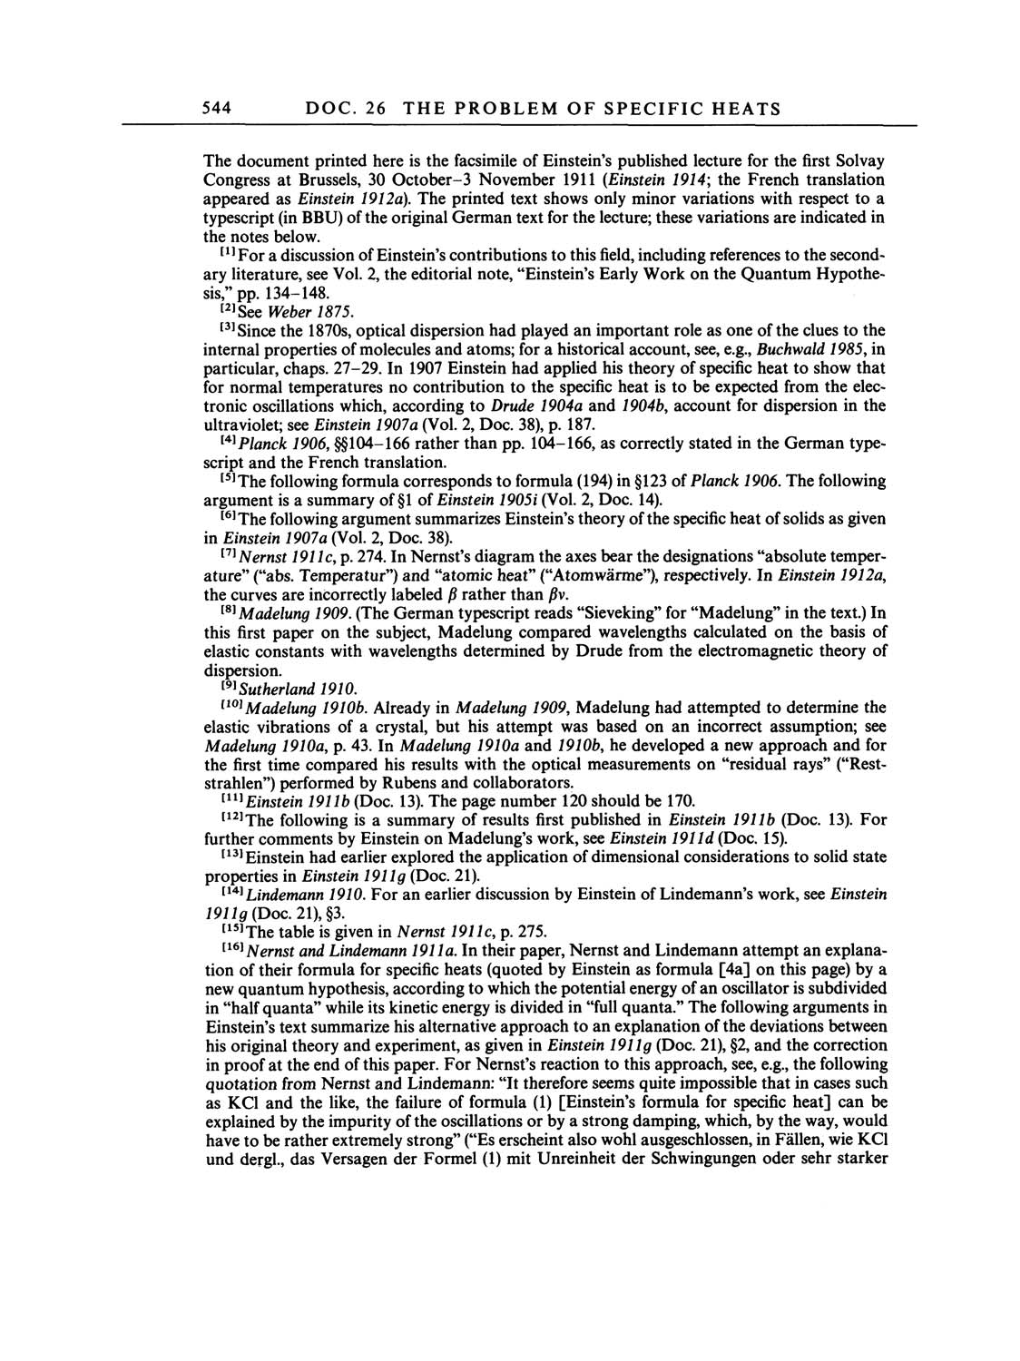 Volume 3: The Swiss Years: Writings 1909-1911 page 544